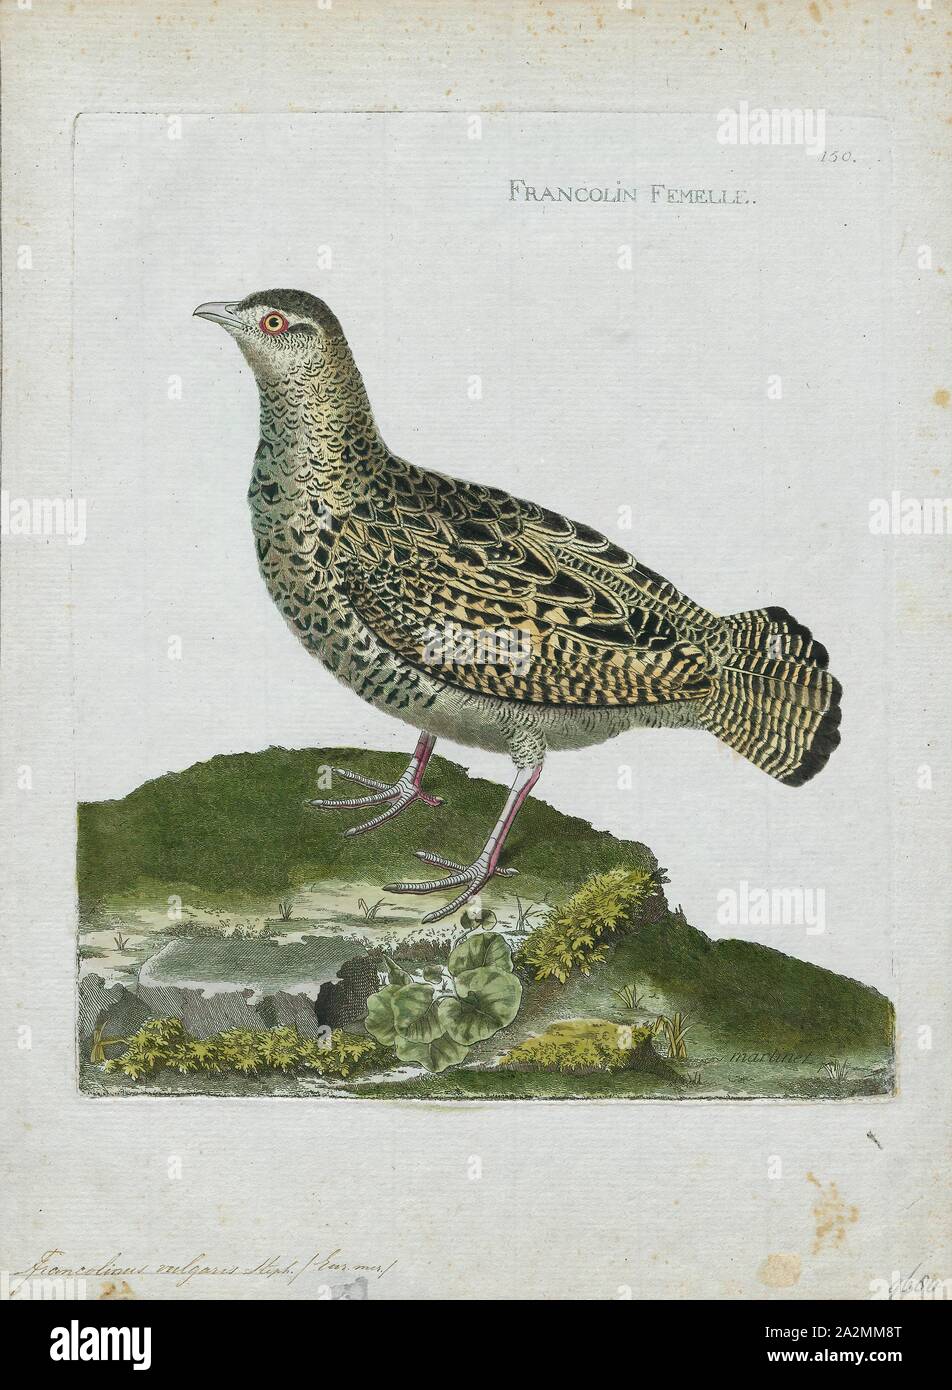 Francolinus vulgaris, Print, Francolinus is a genus of birds in the francolin group of the partridge subfamily of the pheasant family. Its five species range from western Asia and central Asia through to southern Asia and south-eastern Asia., 1790-1796 Stock Photo